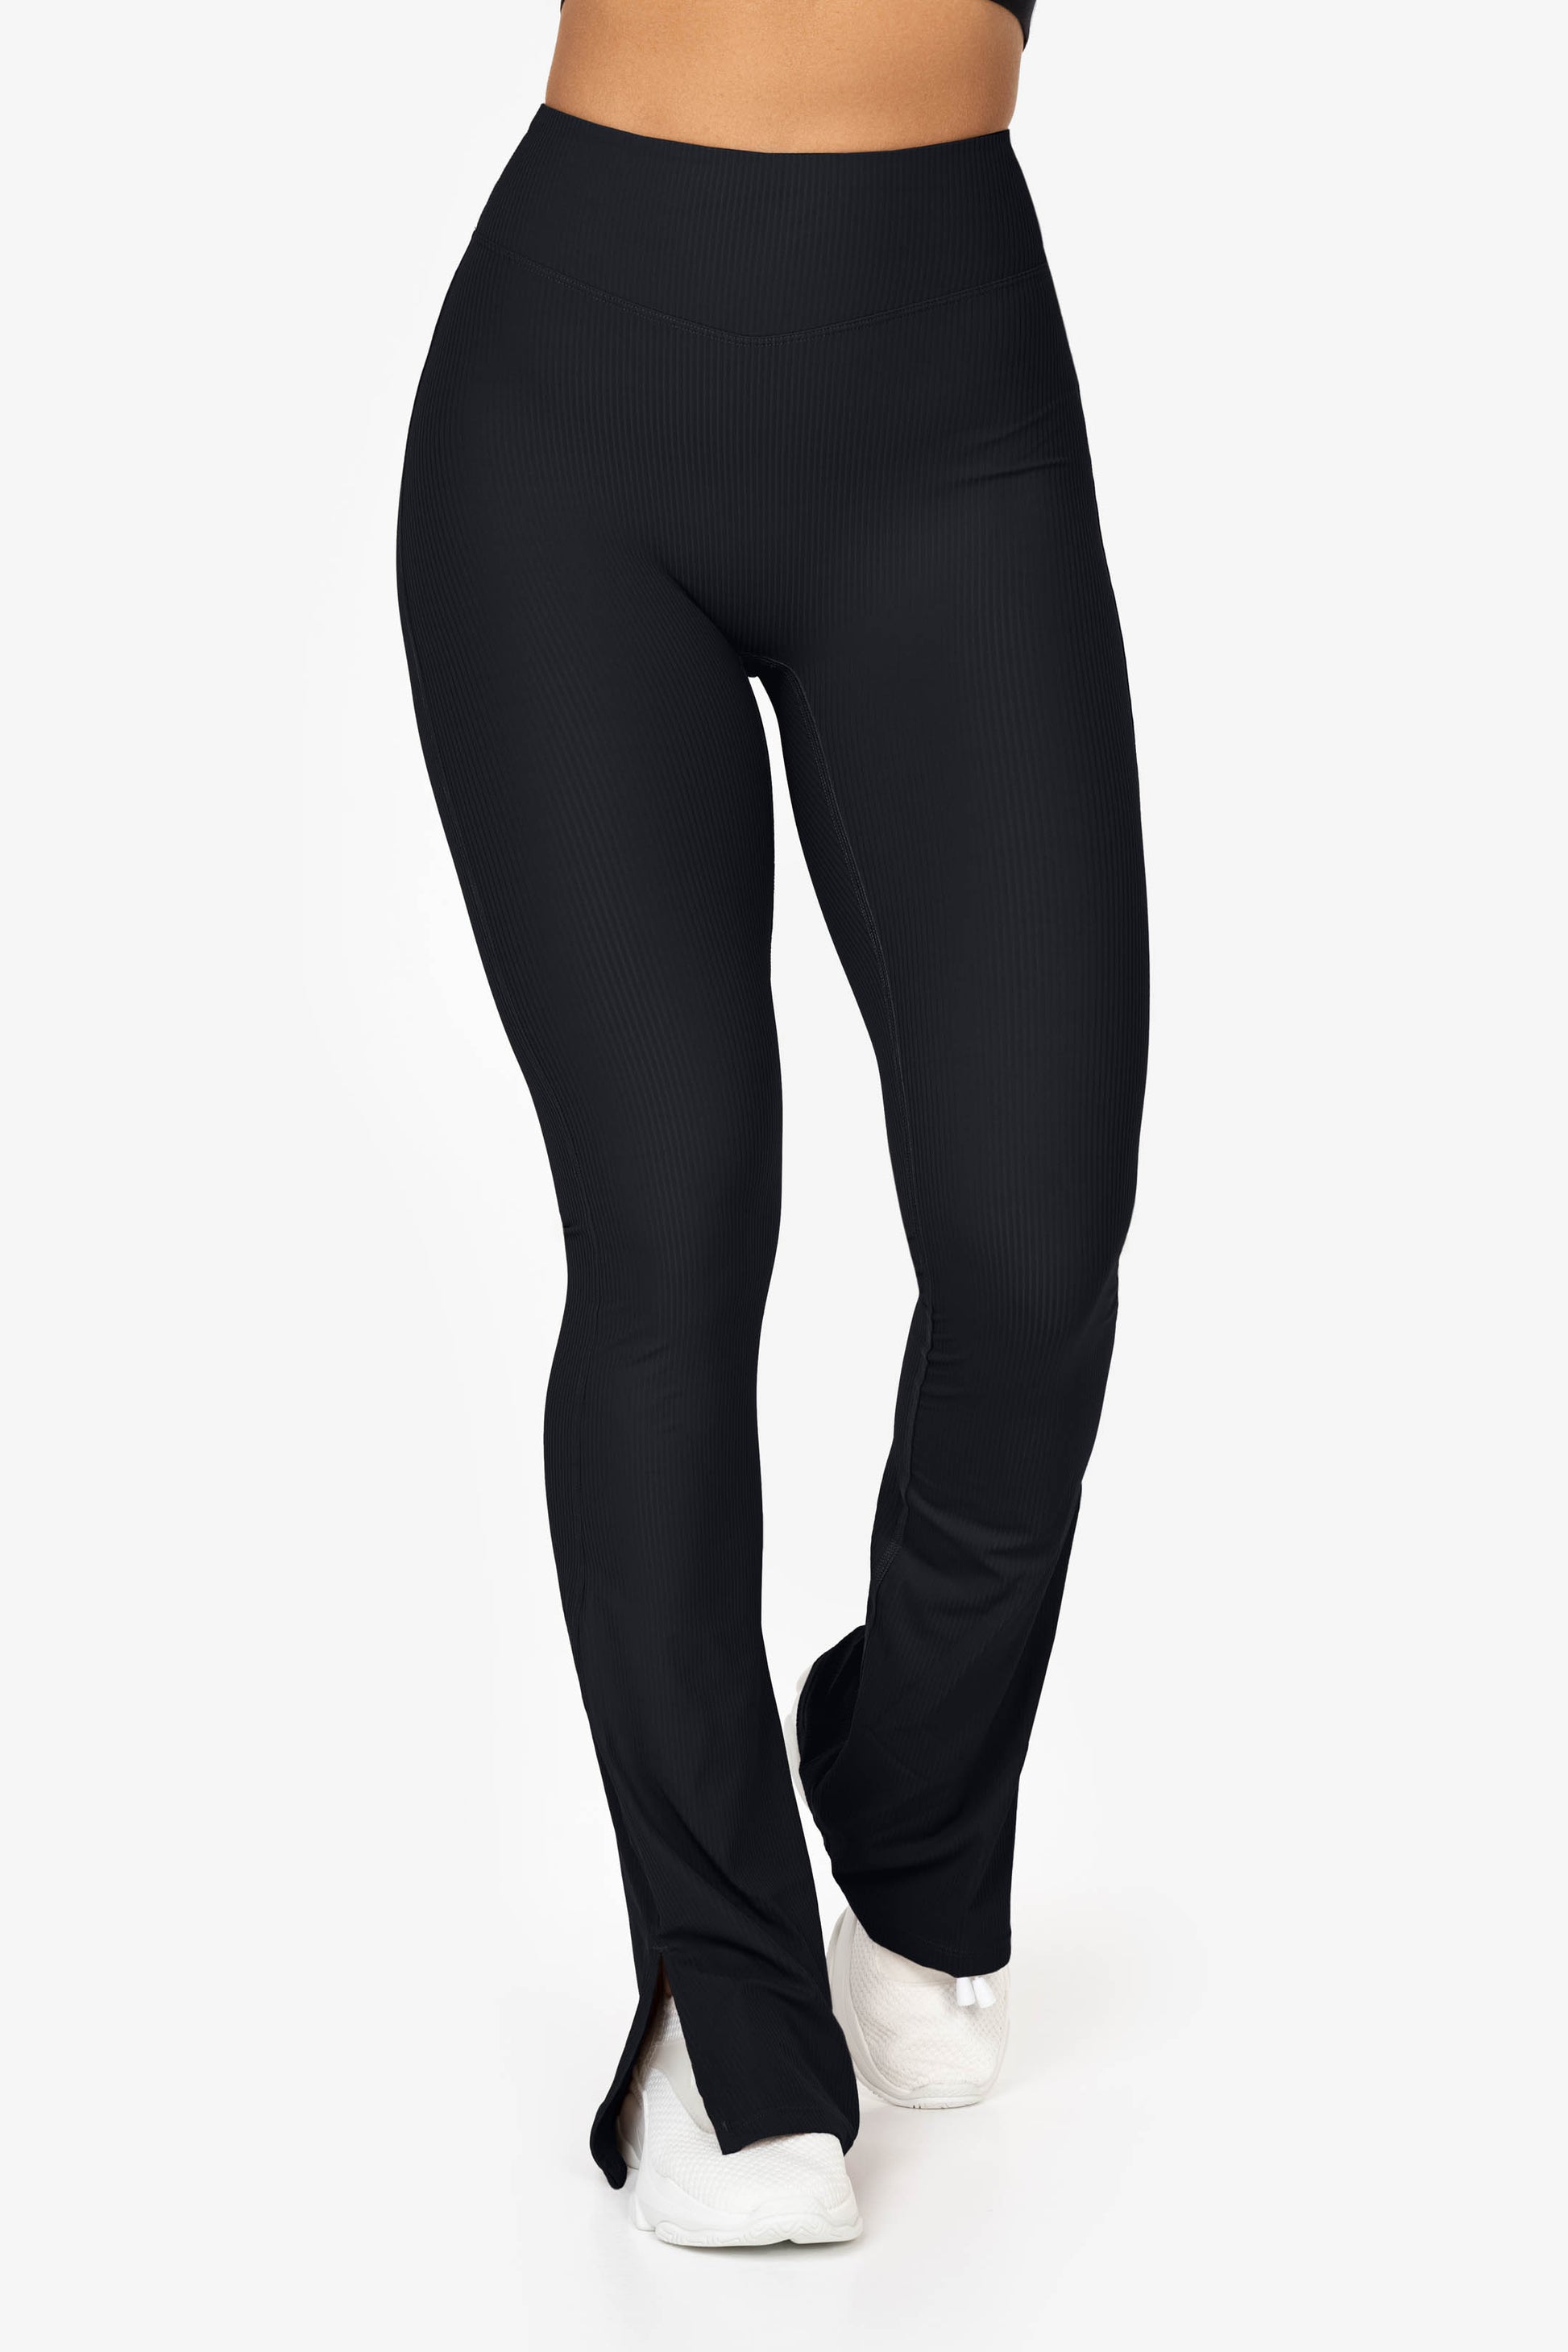 Finely ribbed flared pant, Twik, Leggings & Jeggings for Women